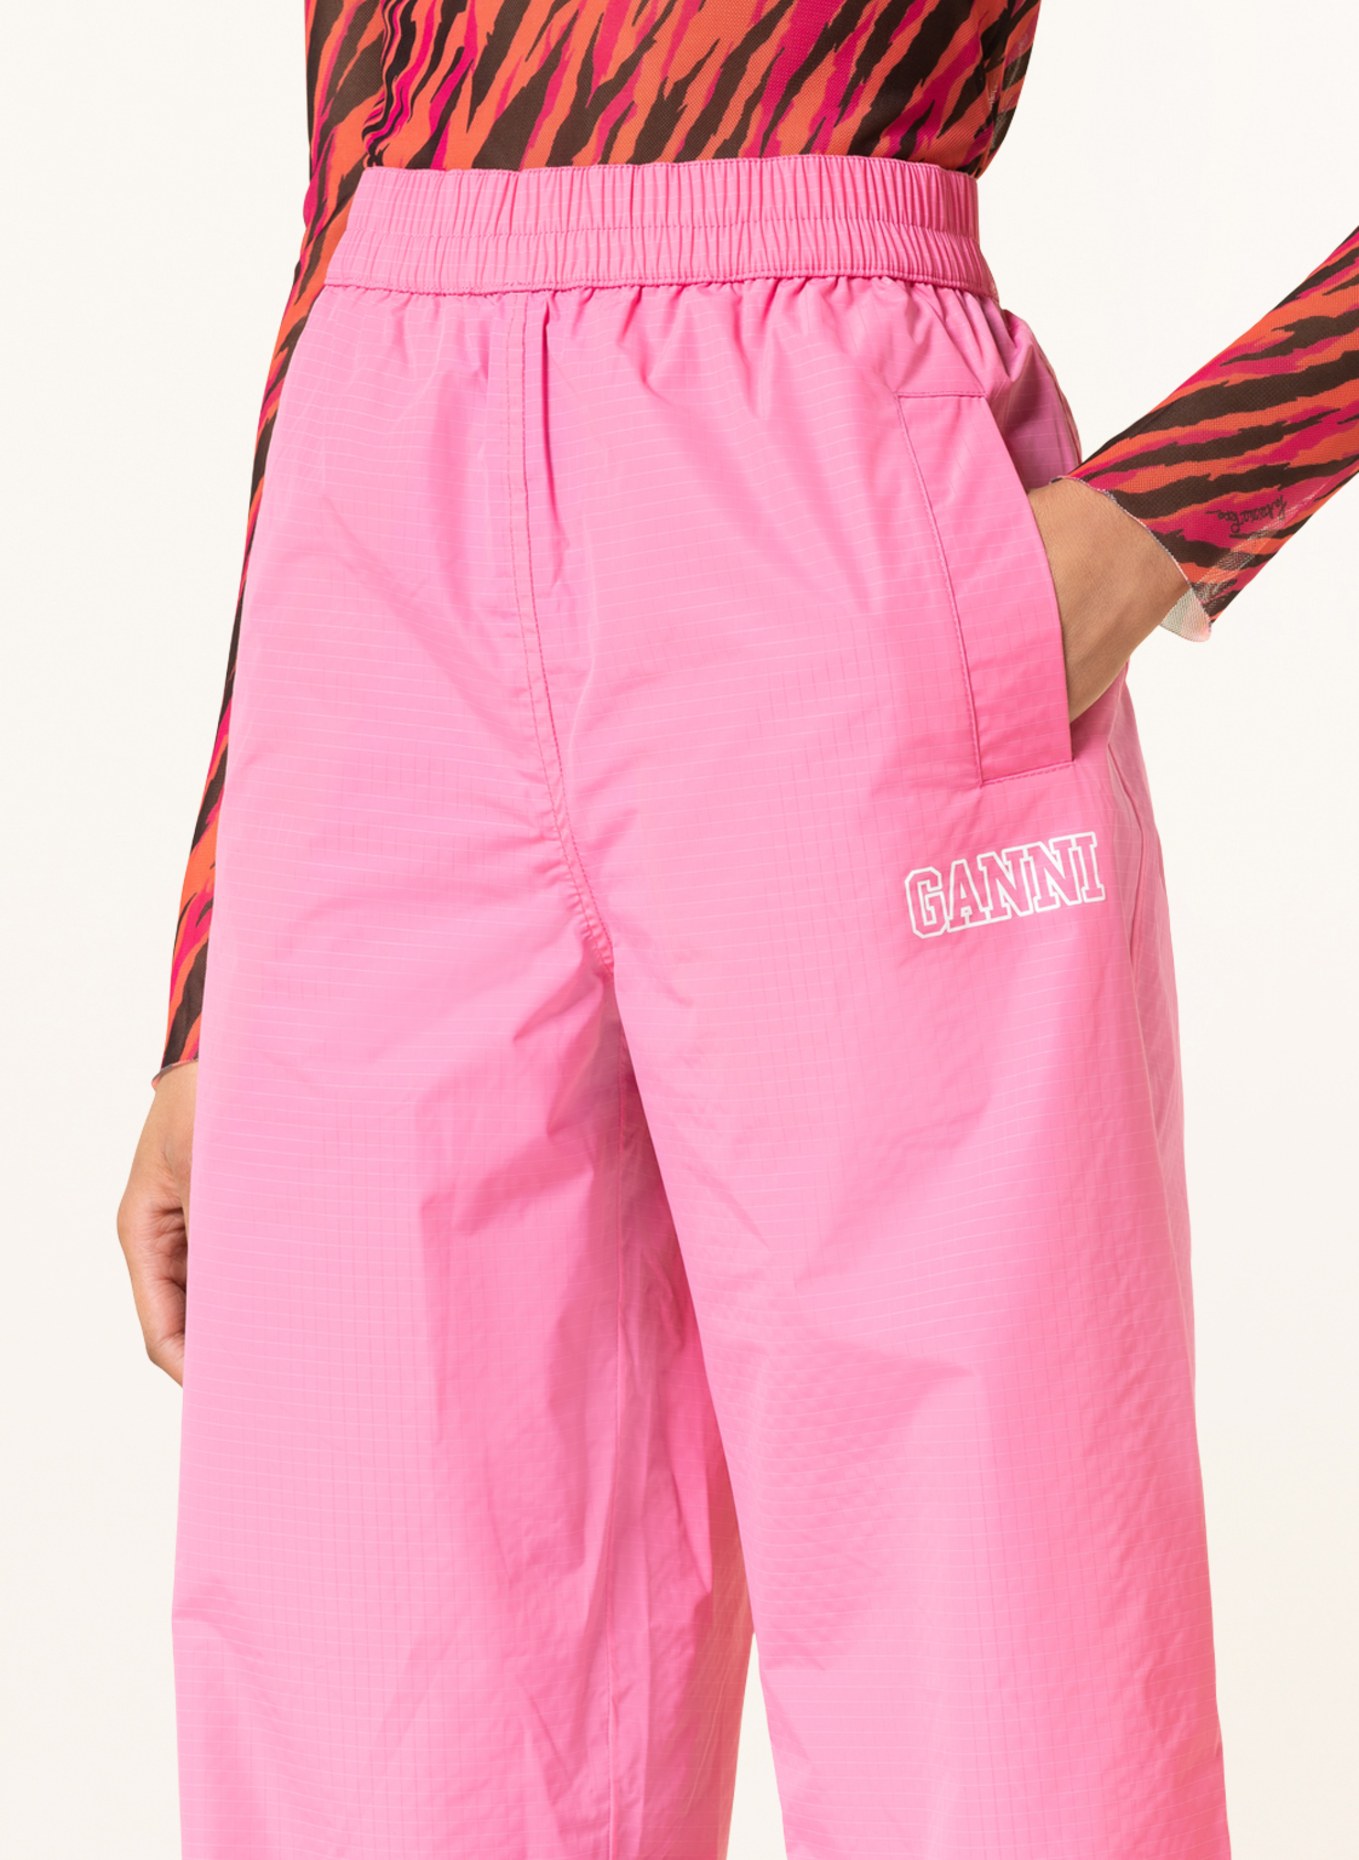 GANNI Pants in jogger style, Color: PINK (Image 5)